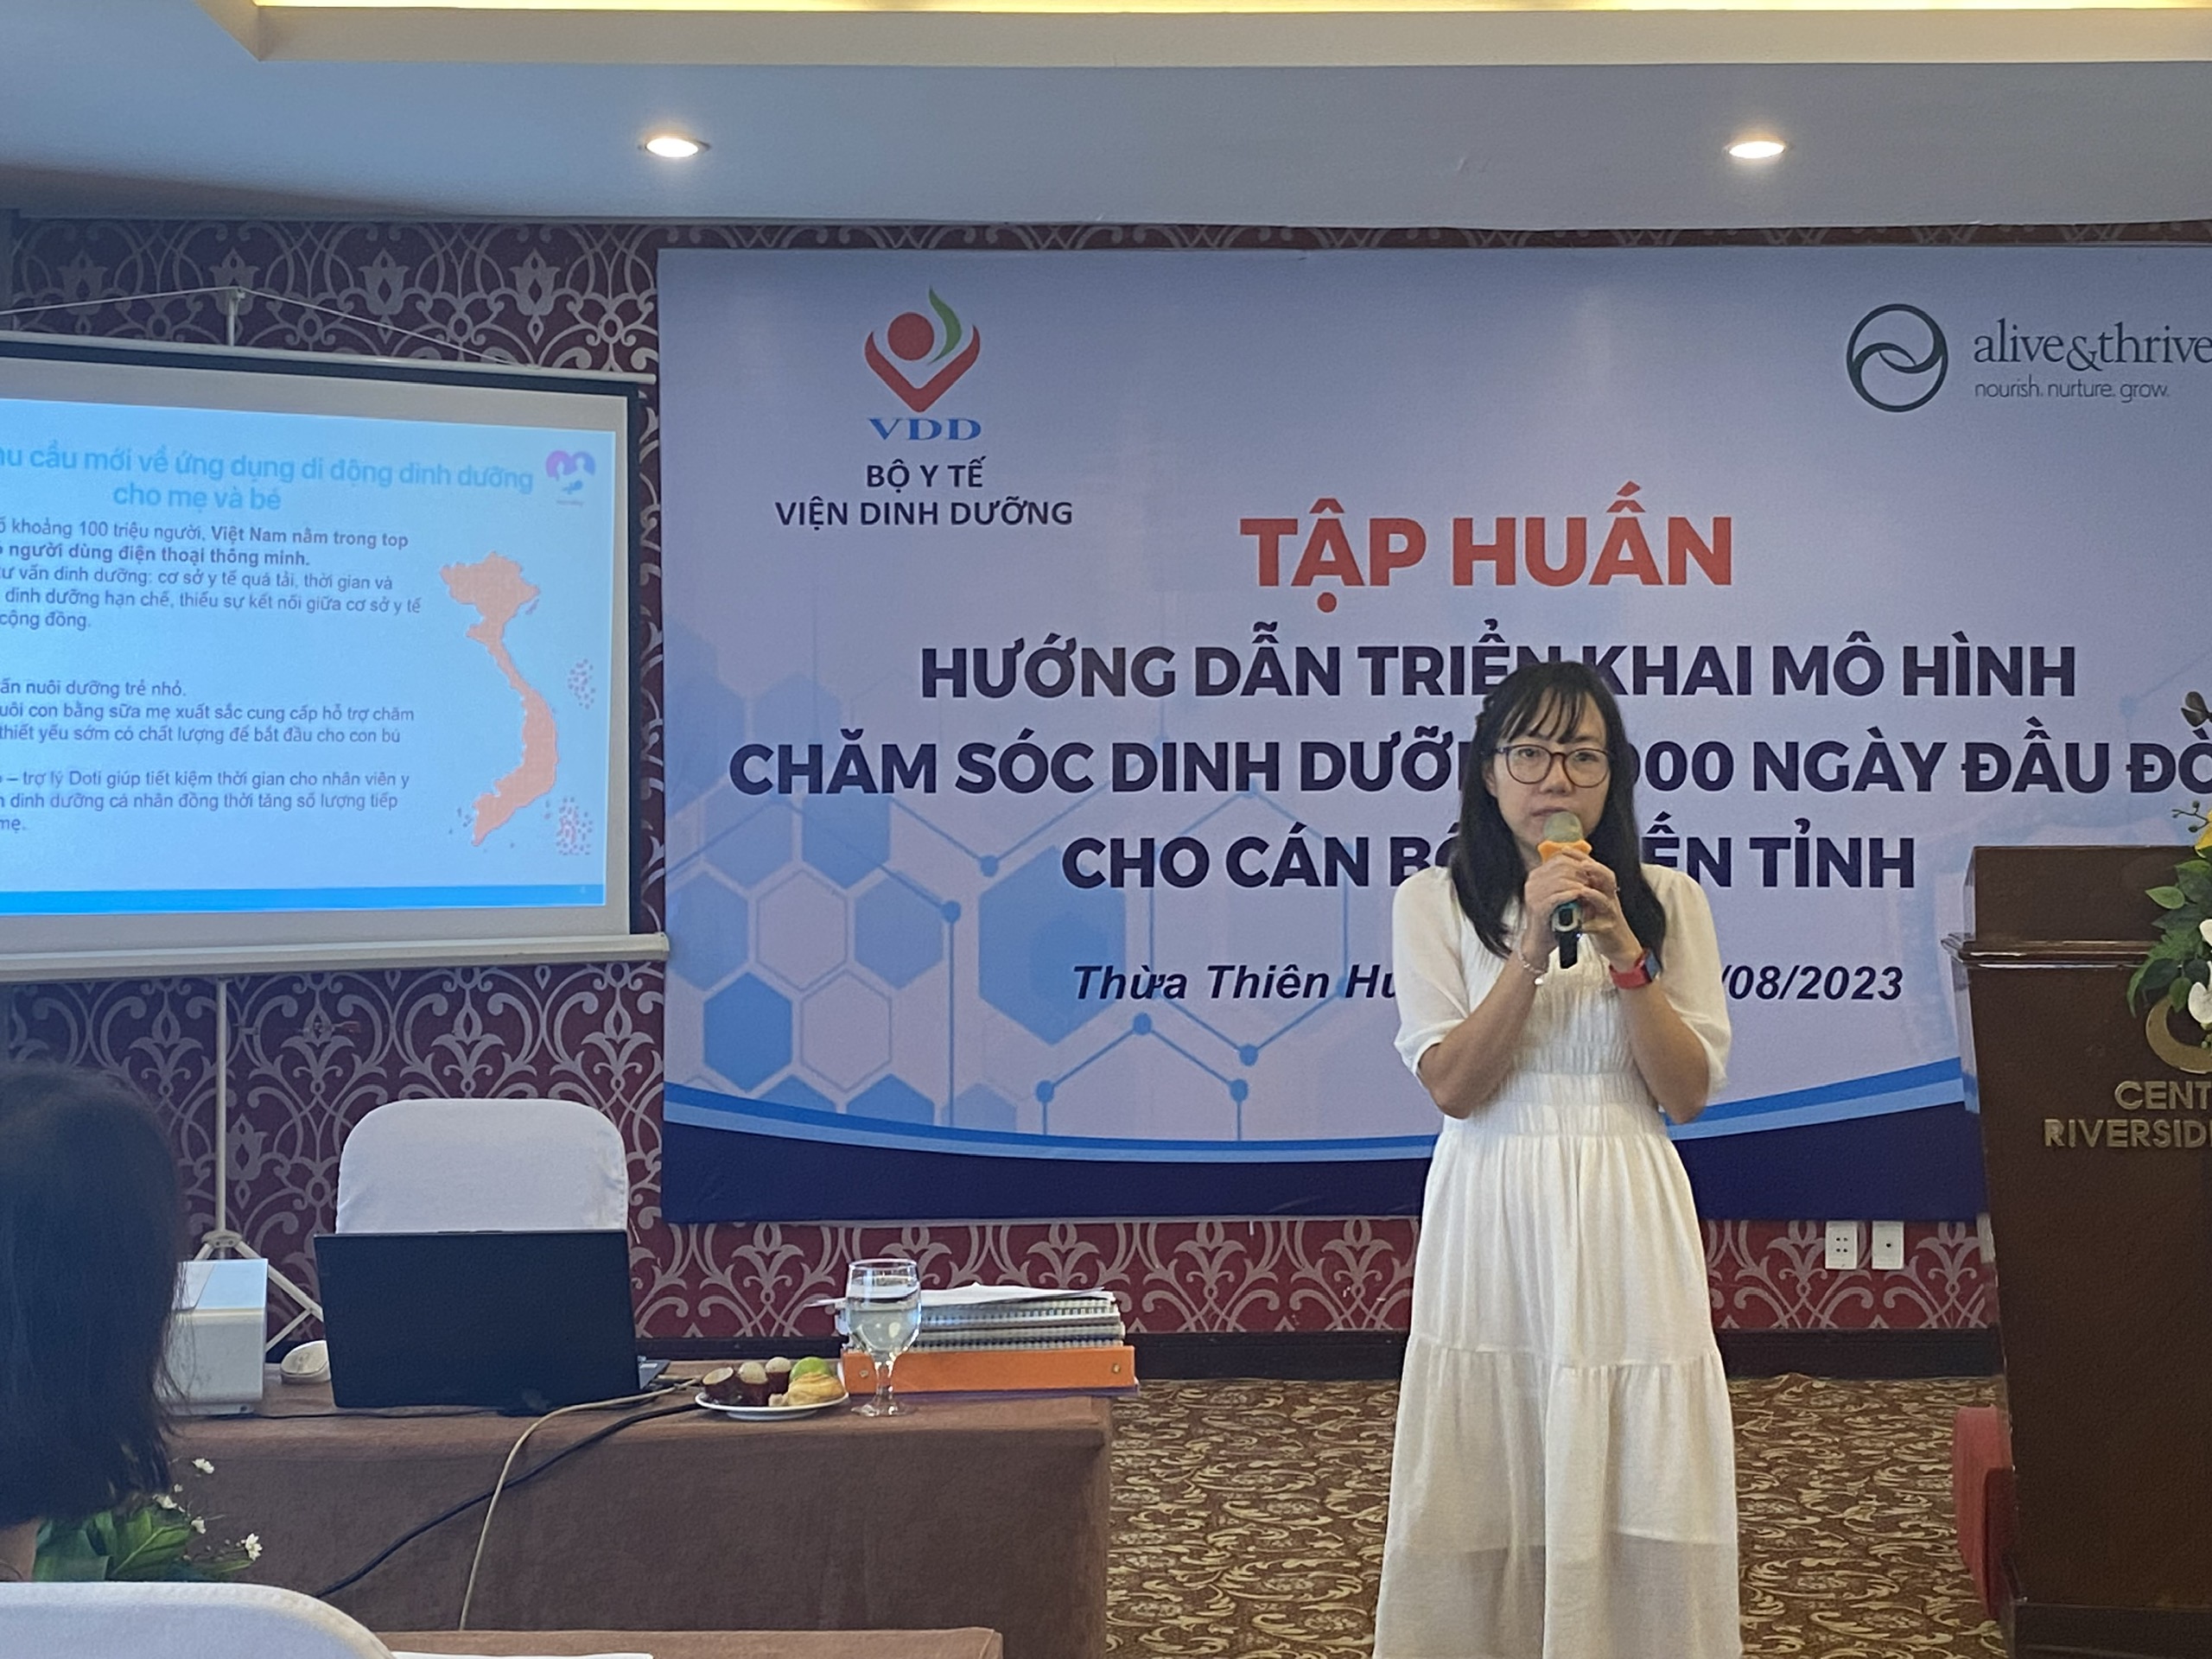 hinh-anh-momby-chinh-thuc-duoc-vien-dinh-duong-quoc-gia-viet-nam-gioi-thieu-den-cac-can-bo-y-te-39-tinh-thanh-442-1